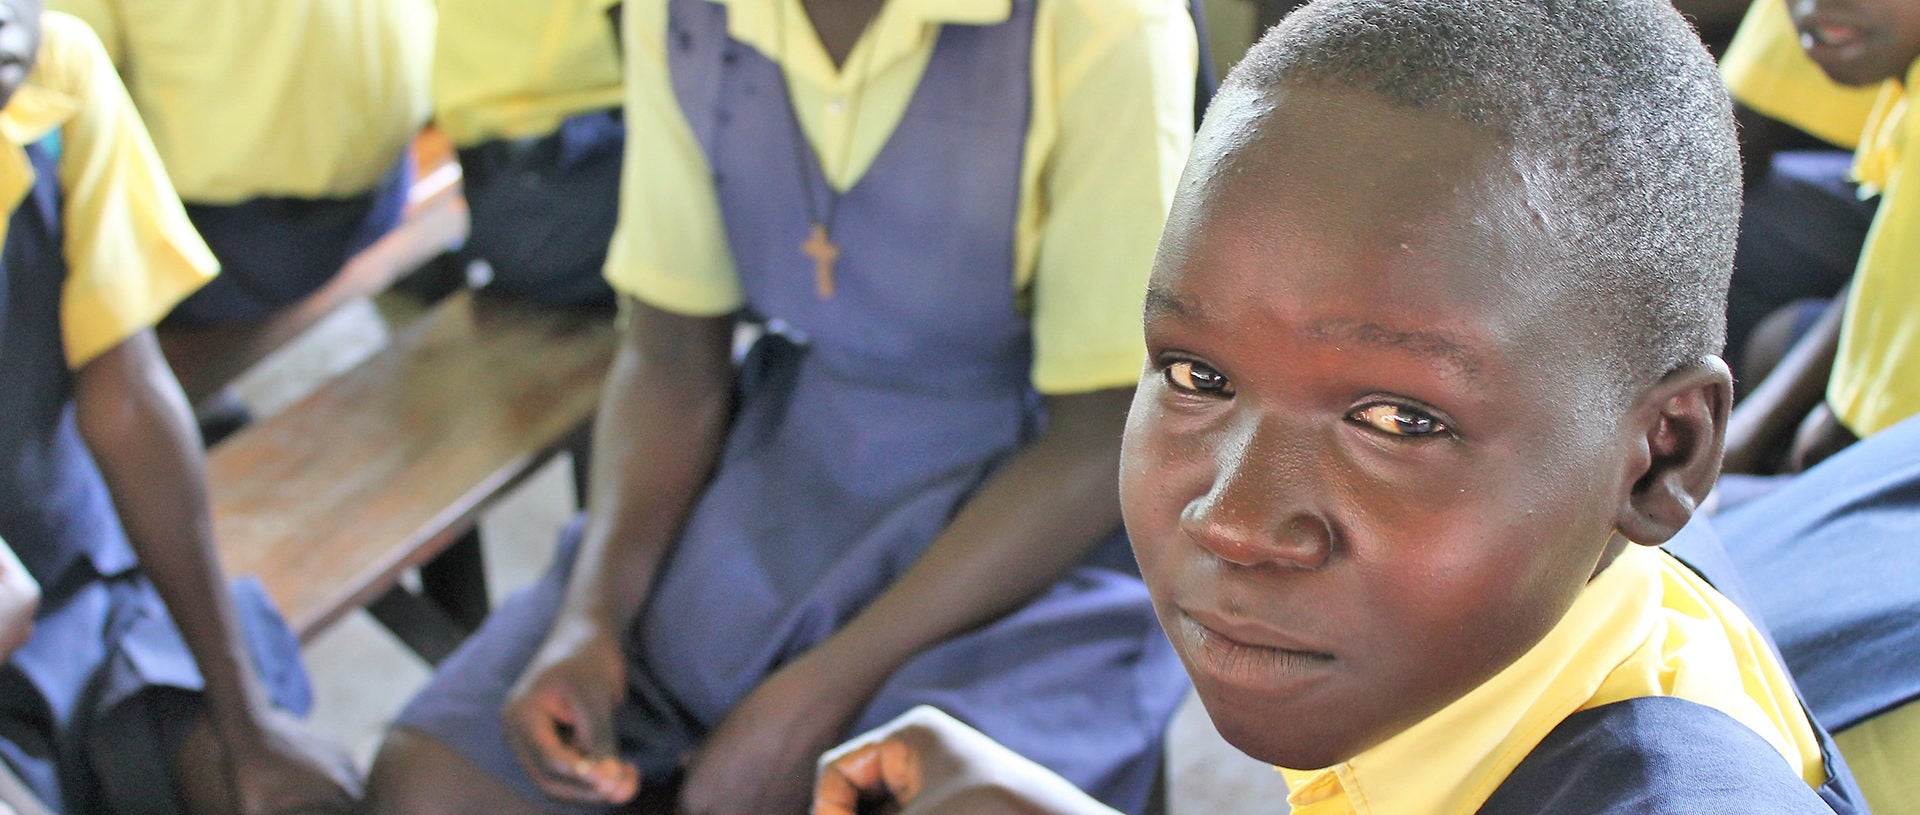 Students in S. Sudan find hope through education banner